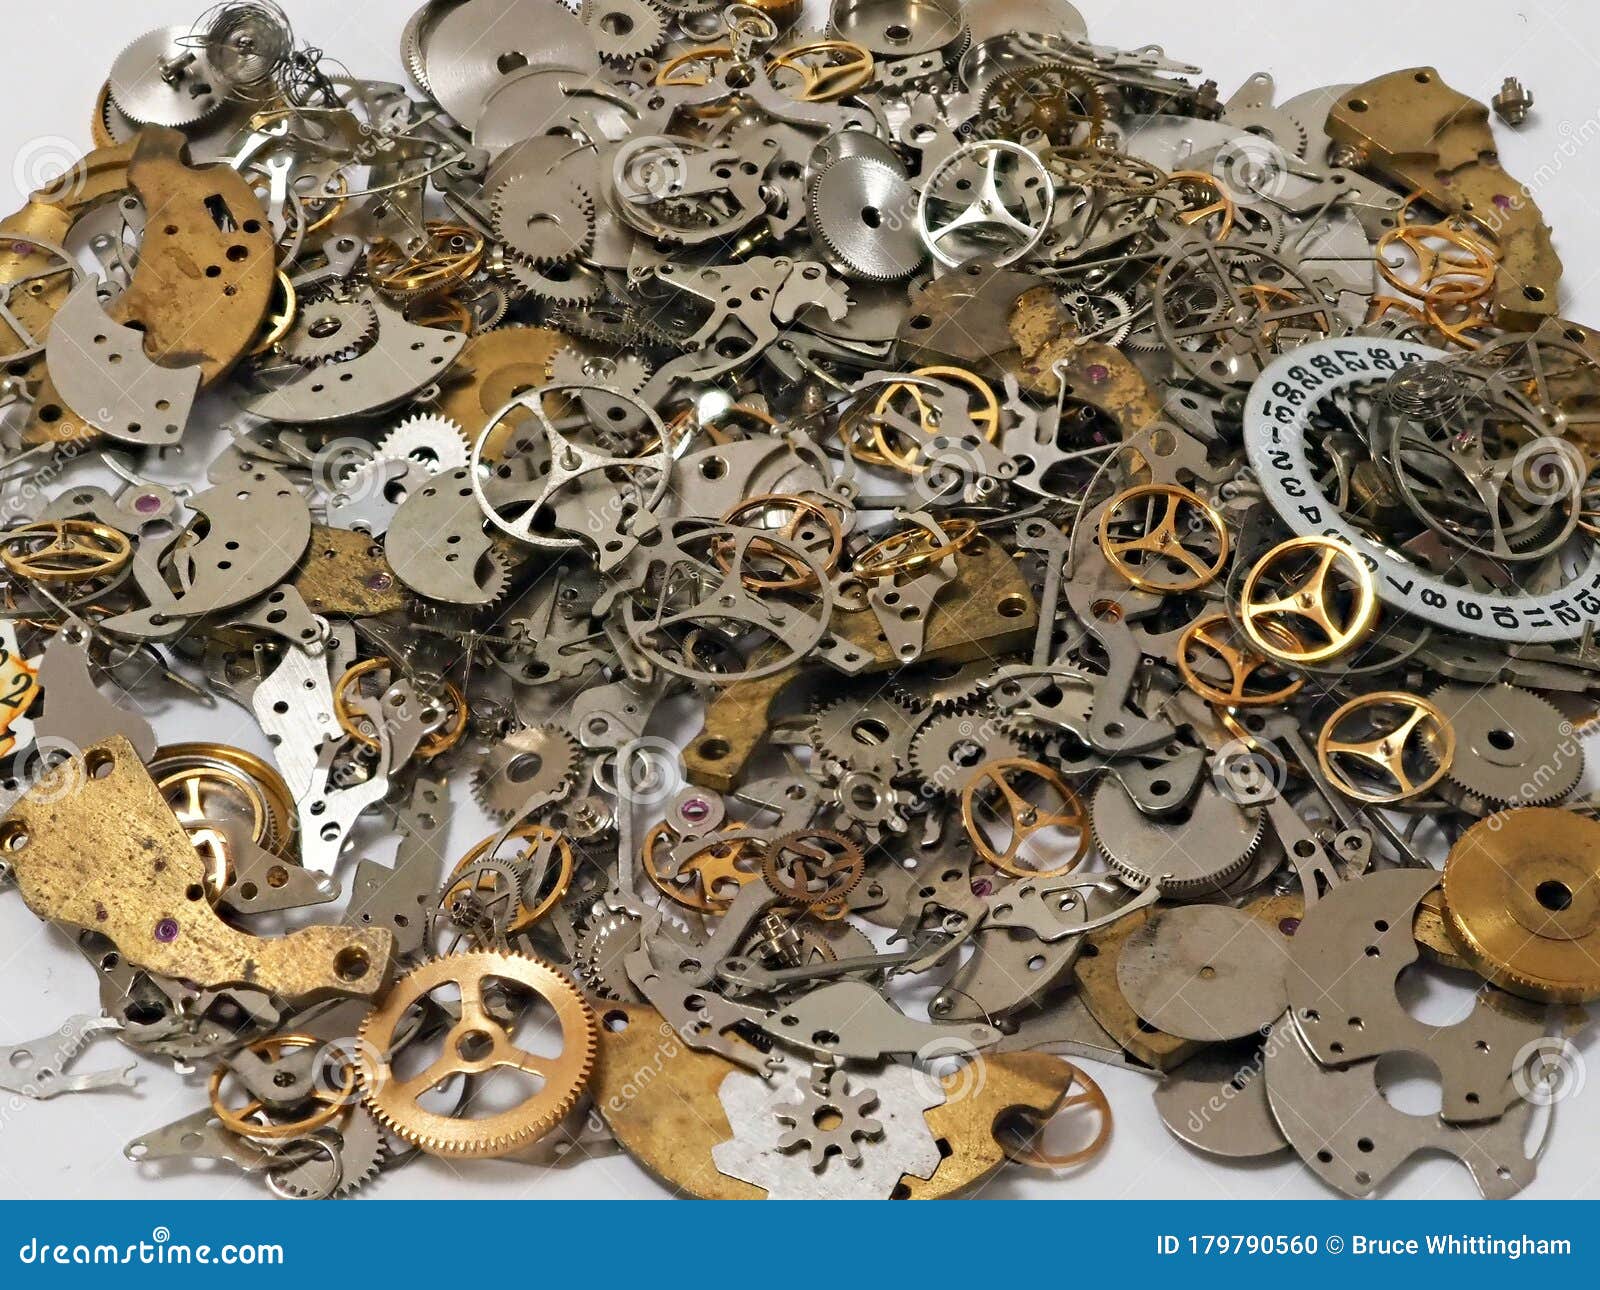 Random Pile of Old Mechanical Watch Parts Stock Photo - Image of